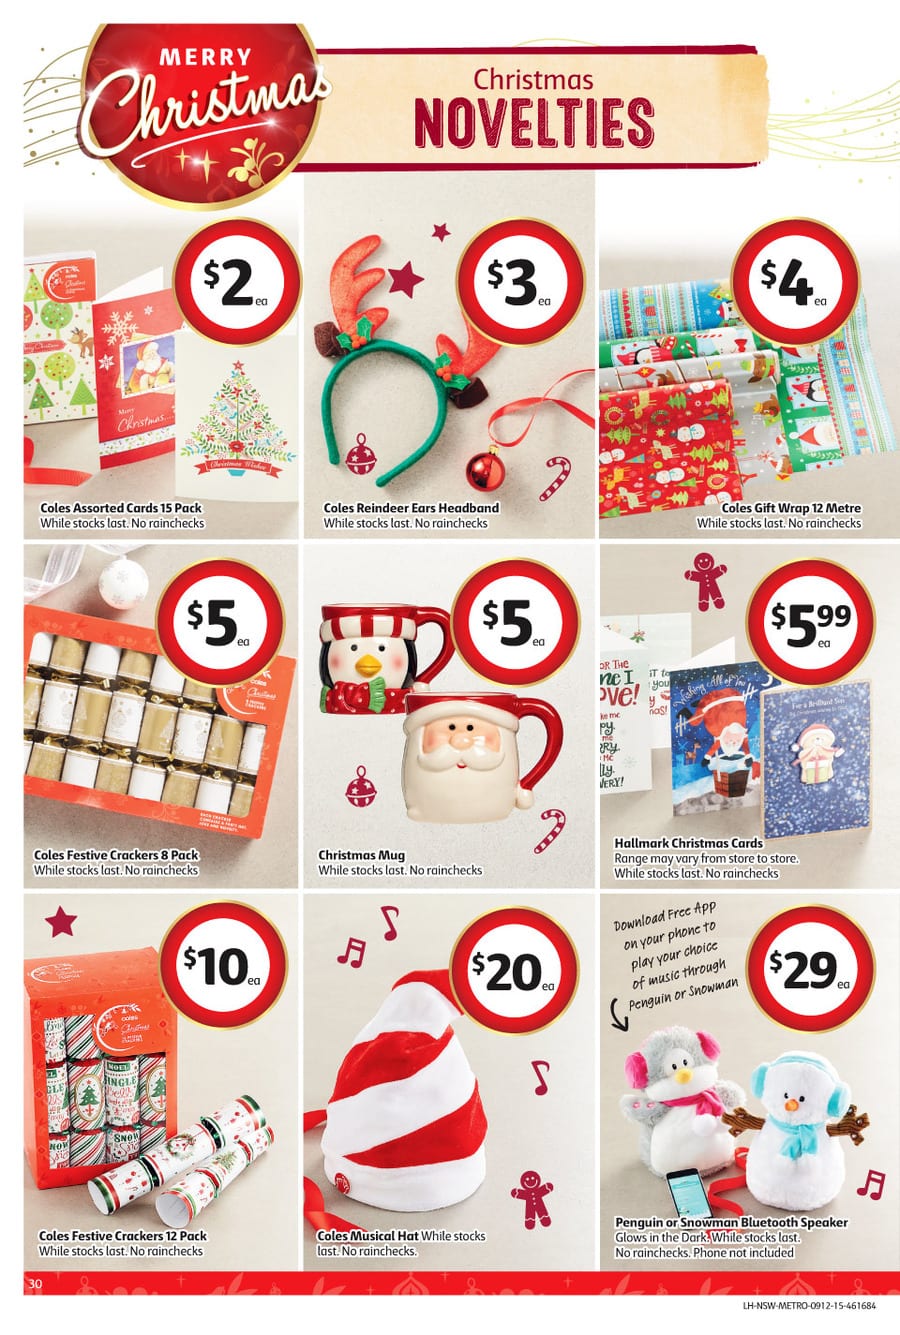 21 Pmq Christmas Catalogue Delighting Xmas With Ideas Tong 46 Christmas Catalogue Ideas Png